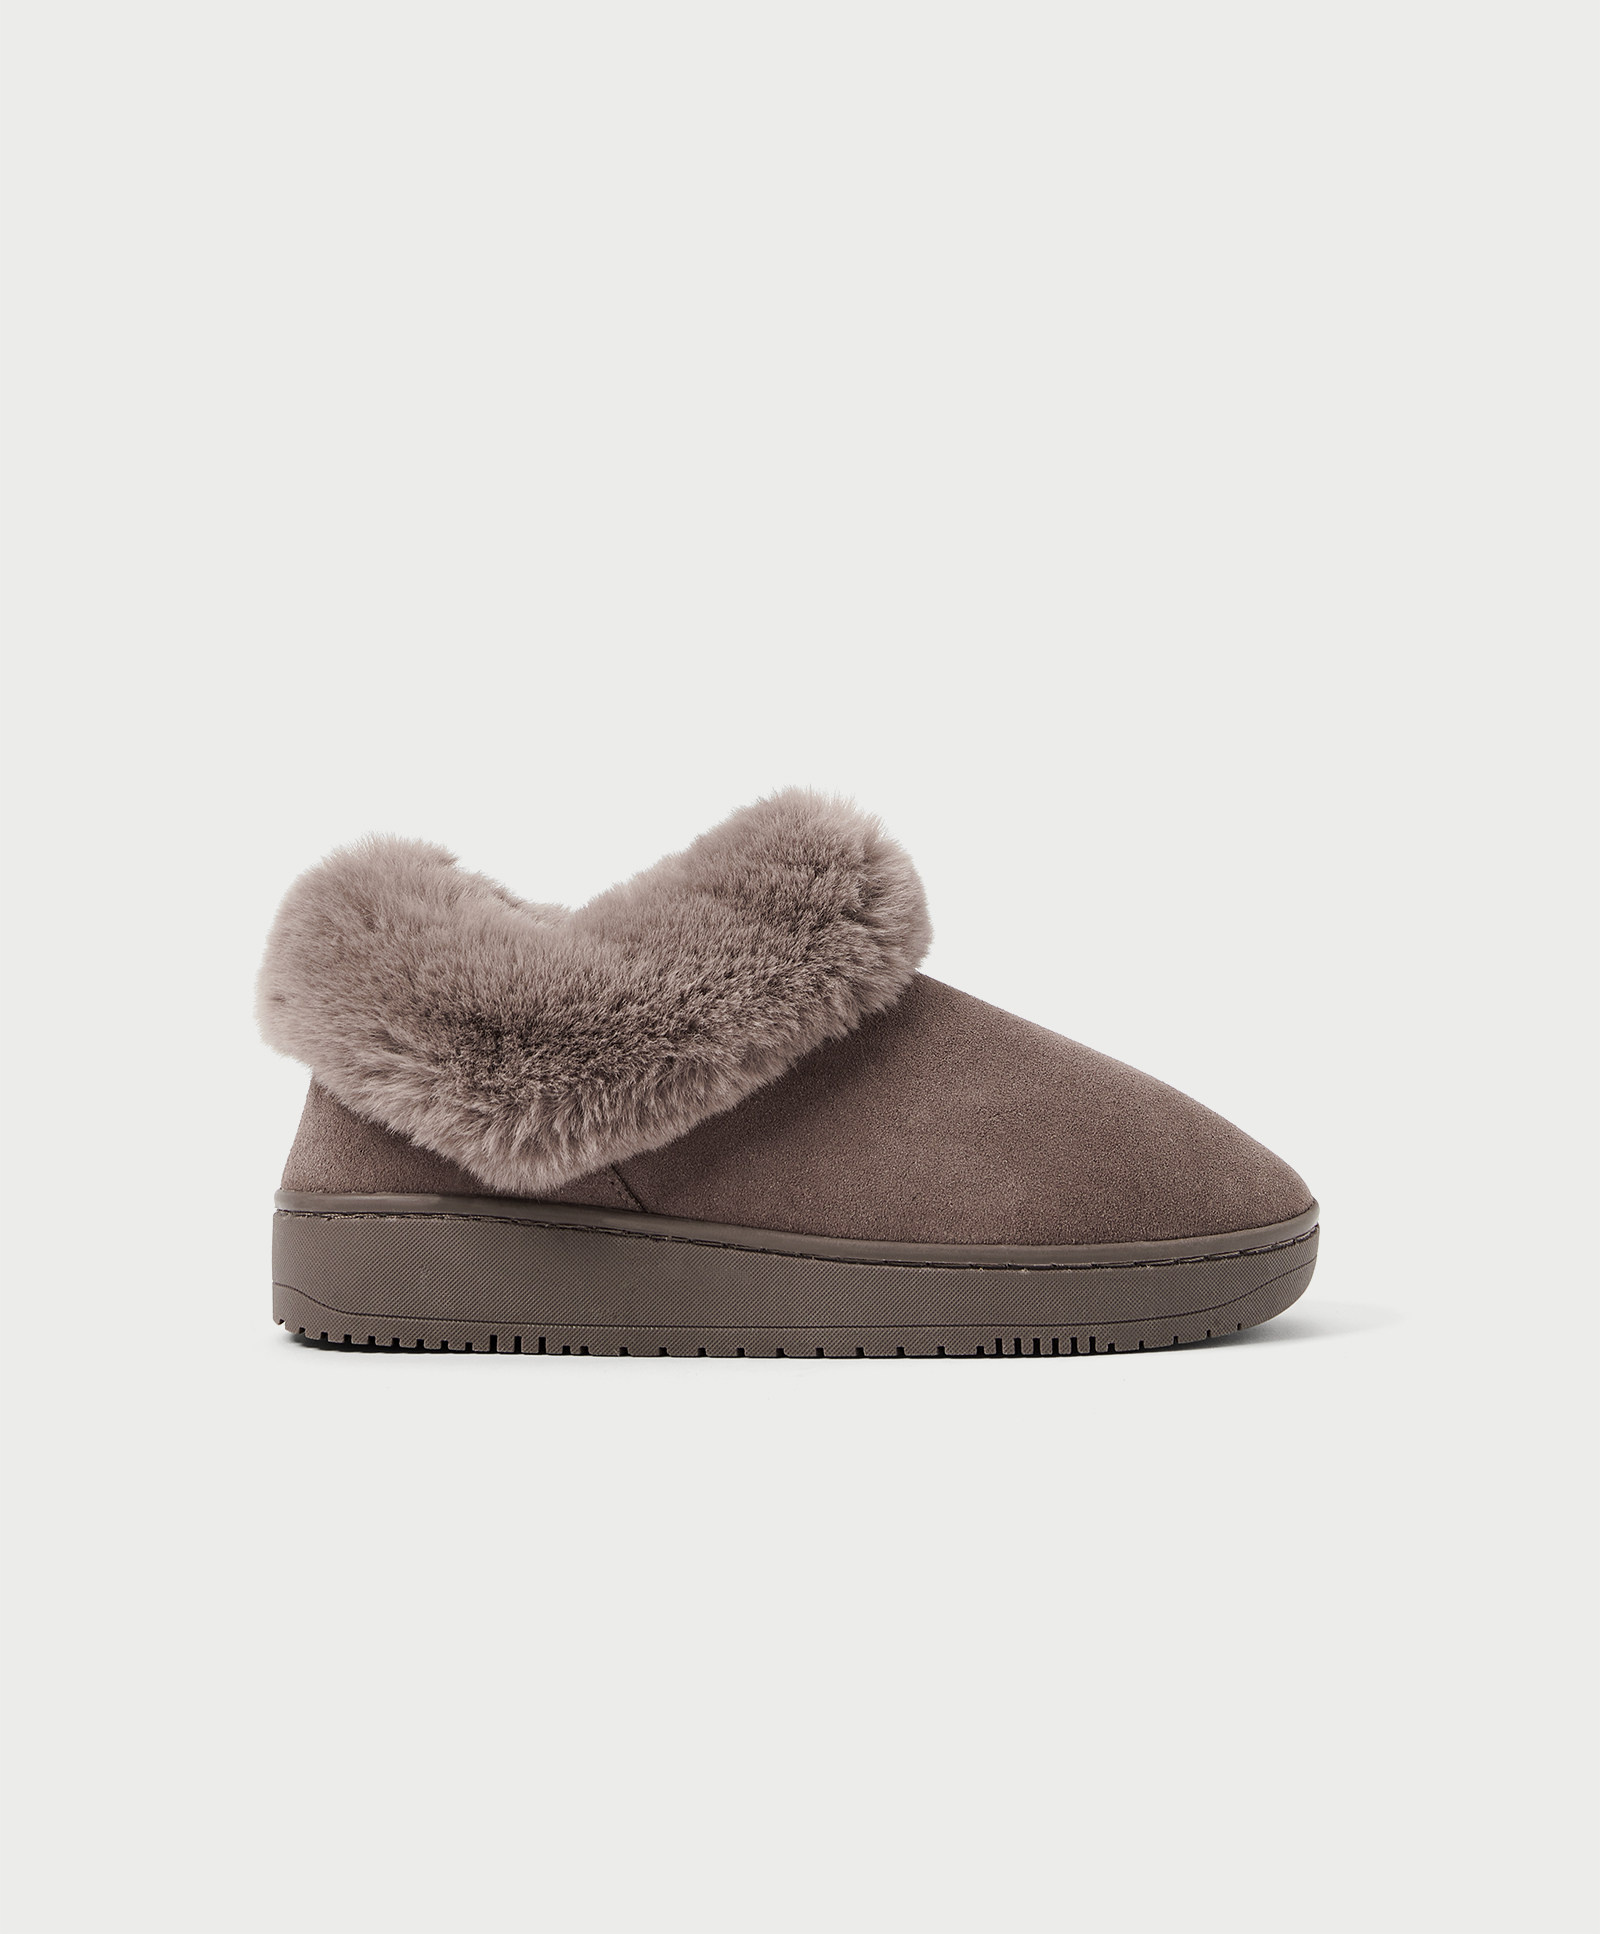 Split-leather closed slippers with collar